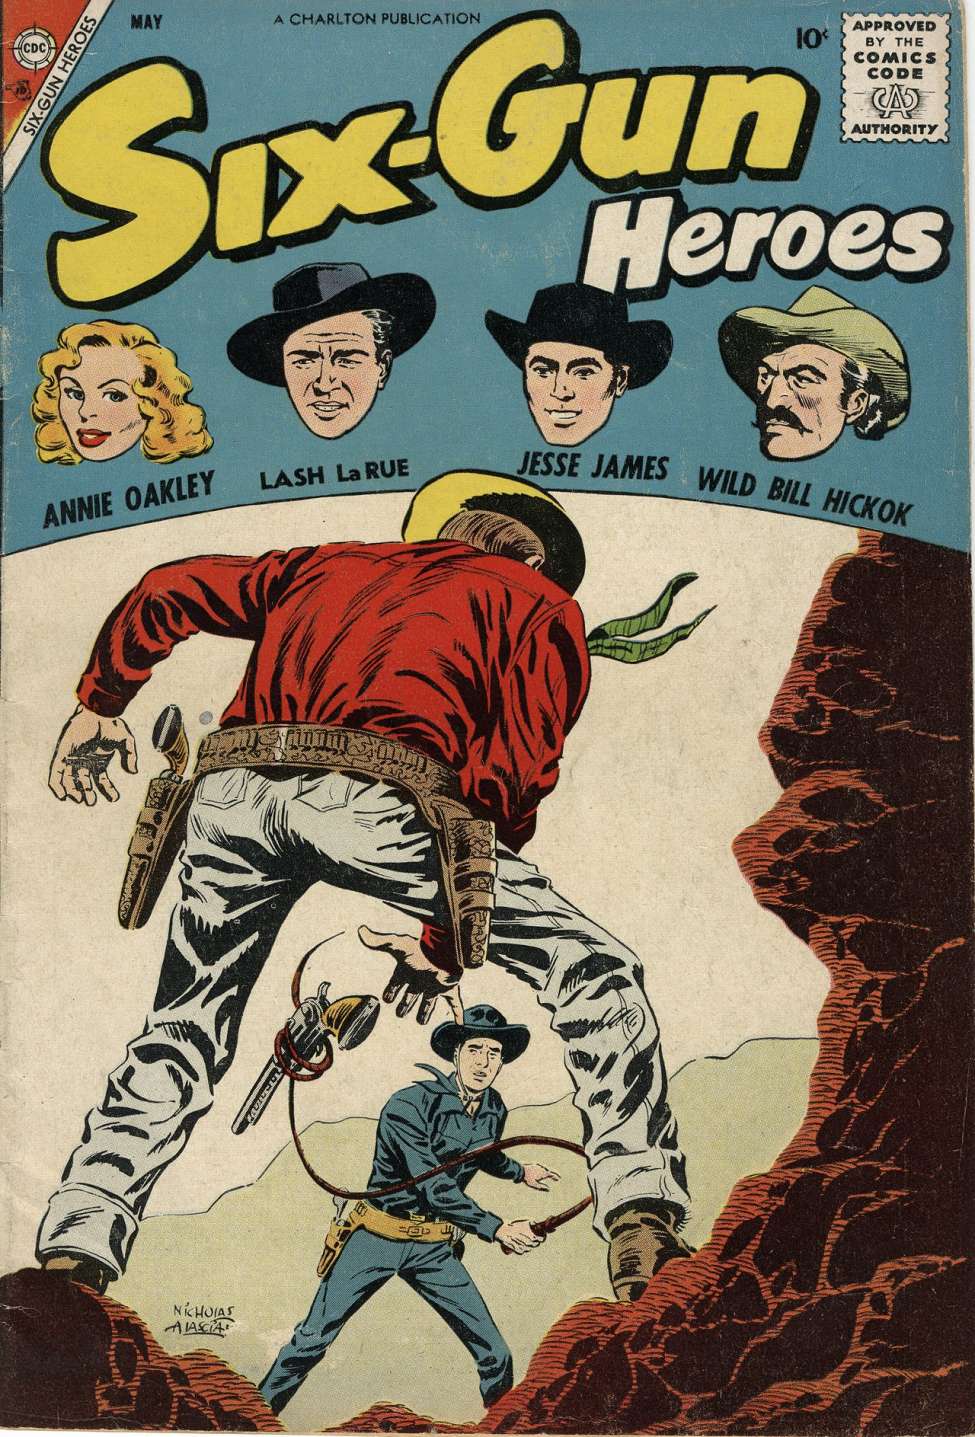 Book Cover For Six-Gun Heroes 46